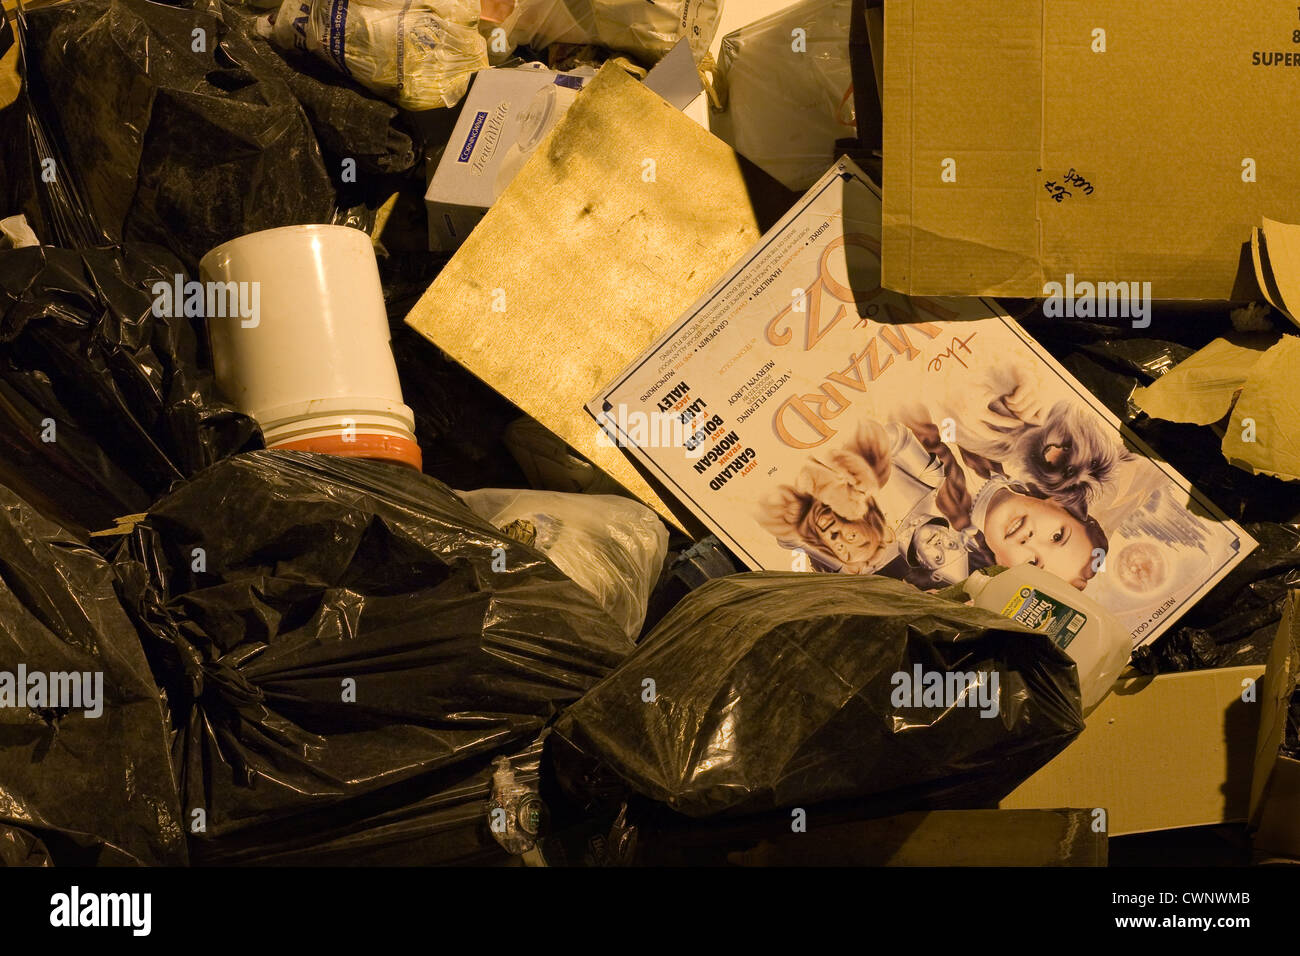 The Wizard of OZ movie poster mixed in with trash and garbage Stock Photo